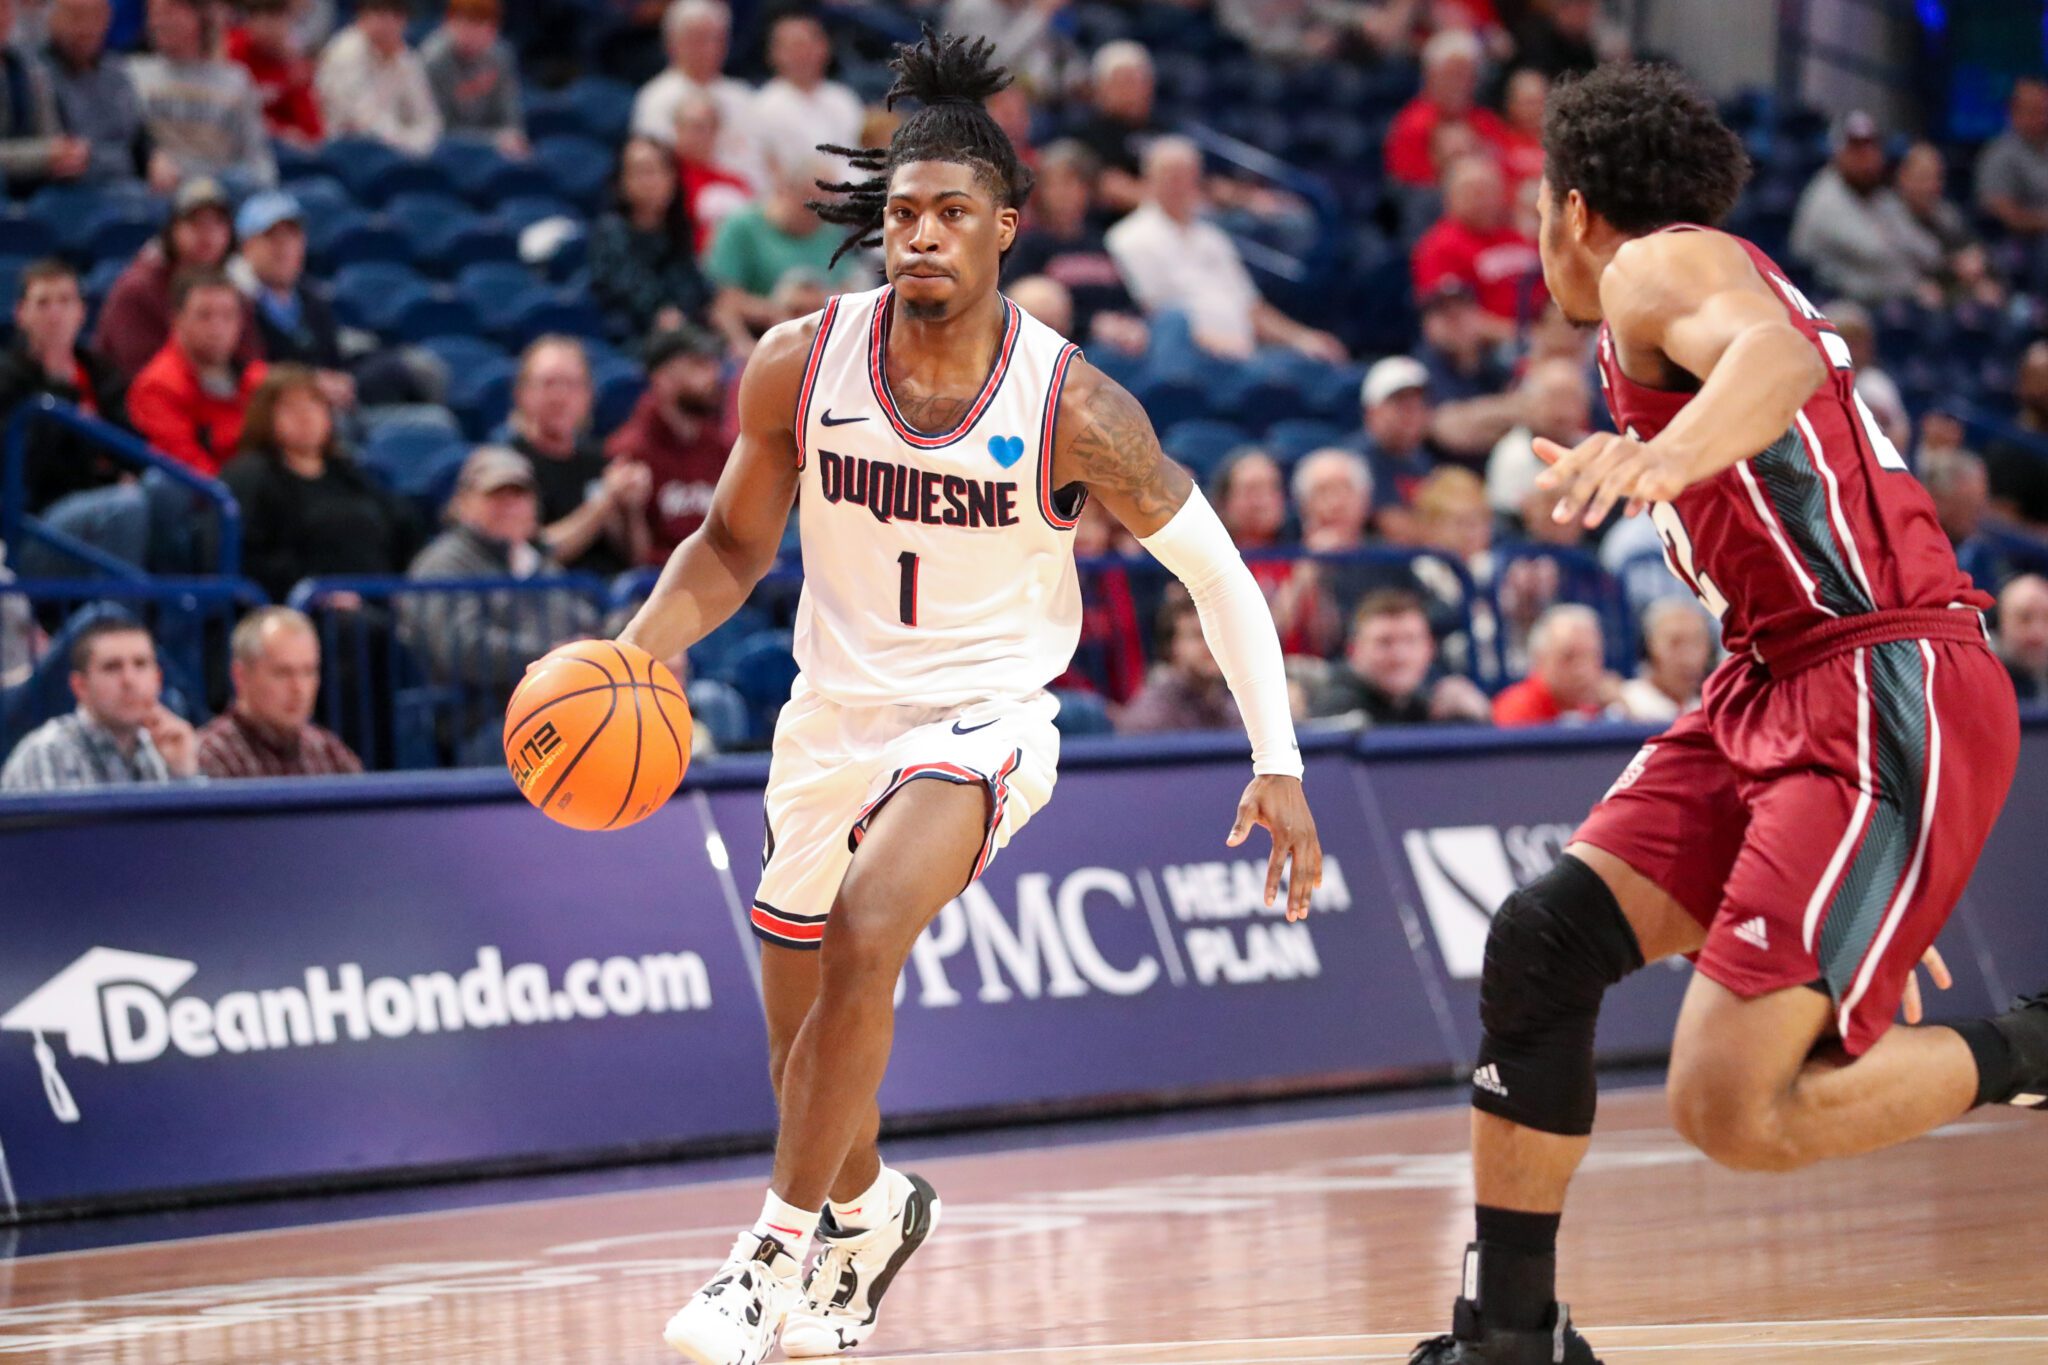 Duquesne Basketball released their Atlantic-10 schedule on Wednesday